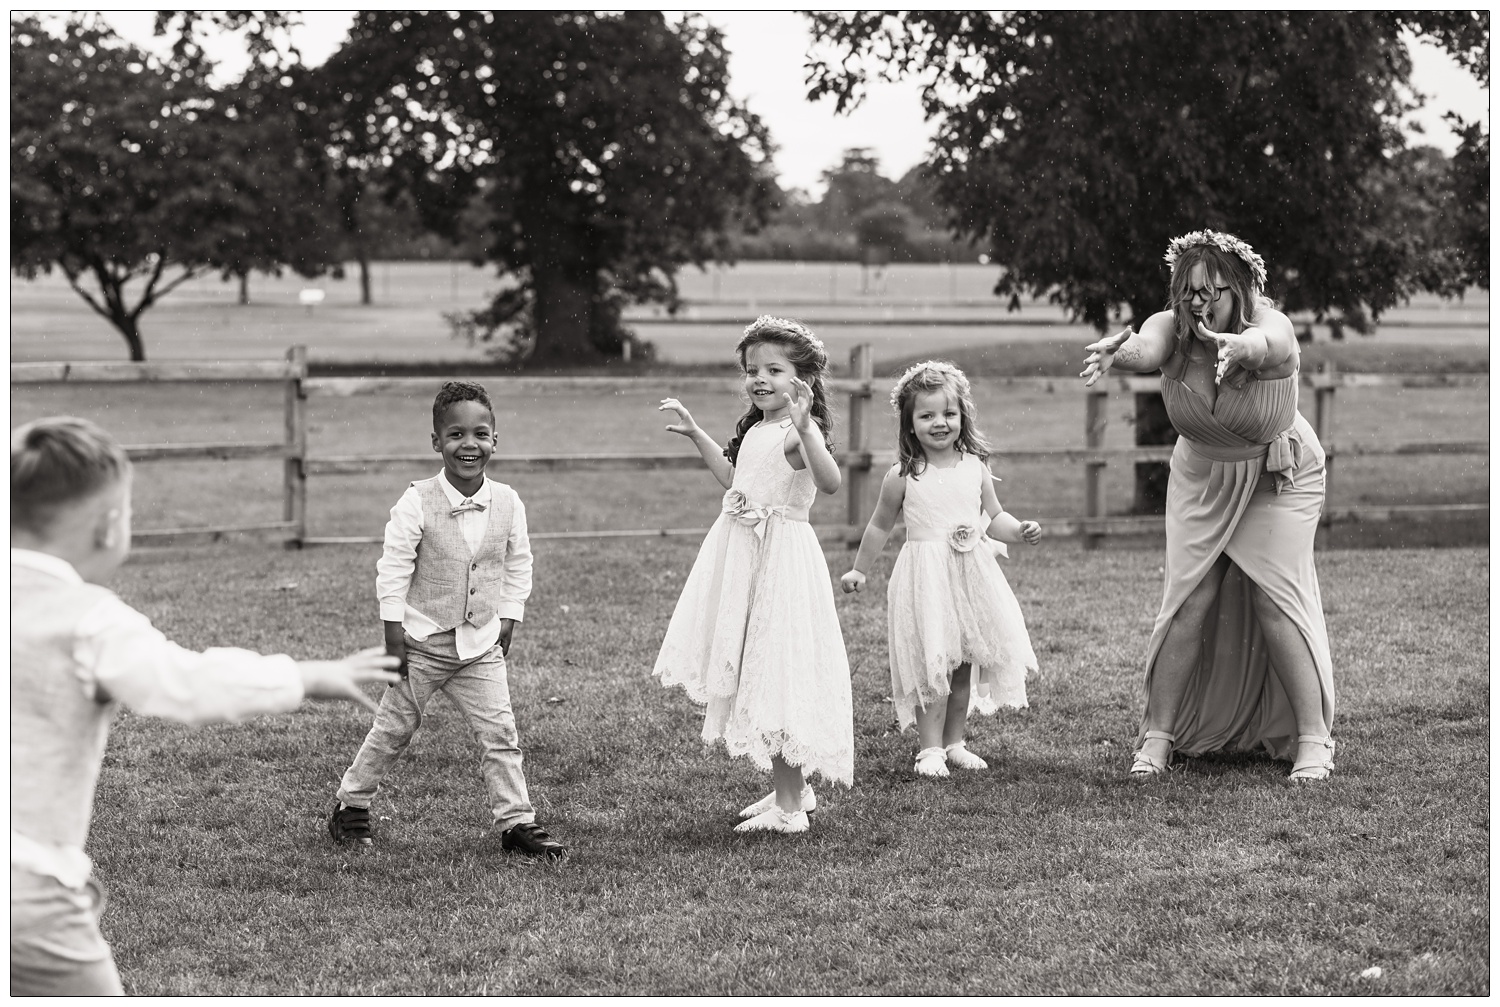 A bridesmaid playing with the children in the rain at a wedding near Ipswich.